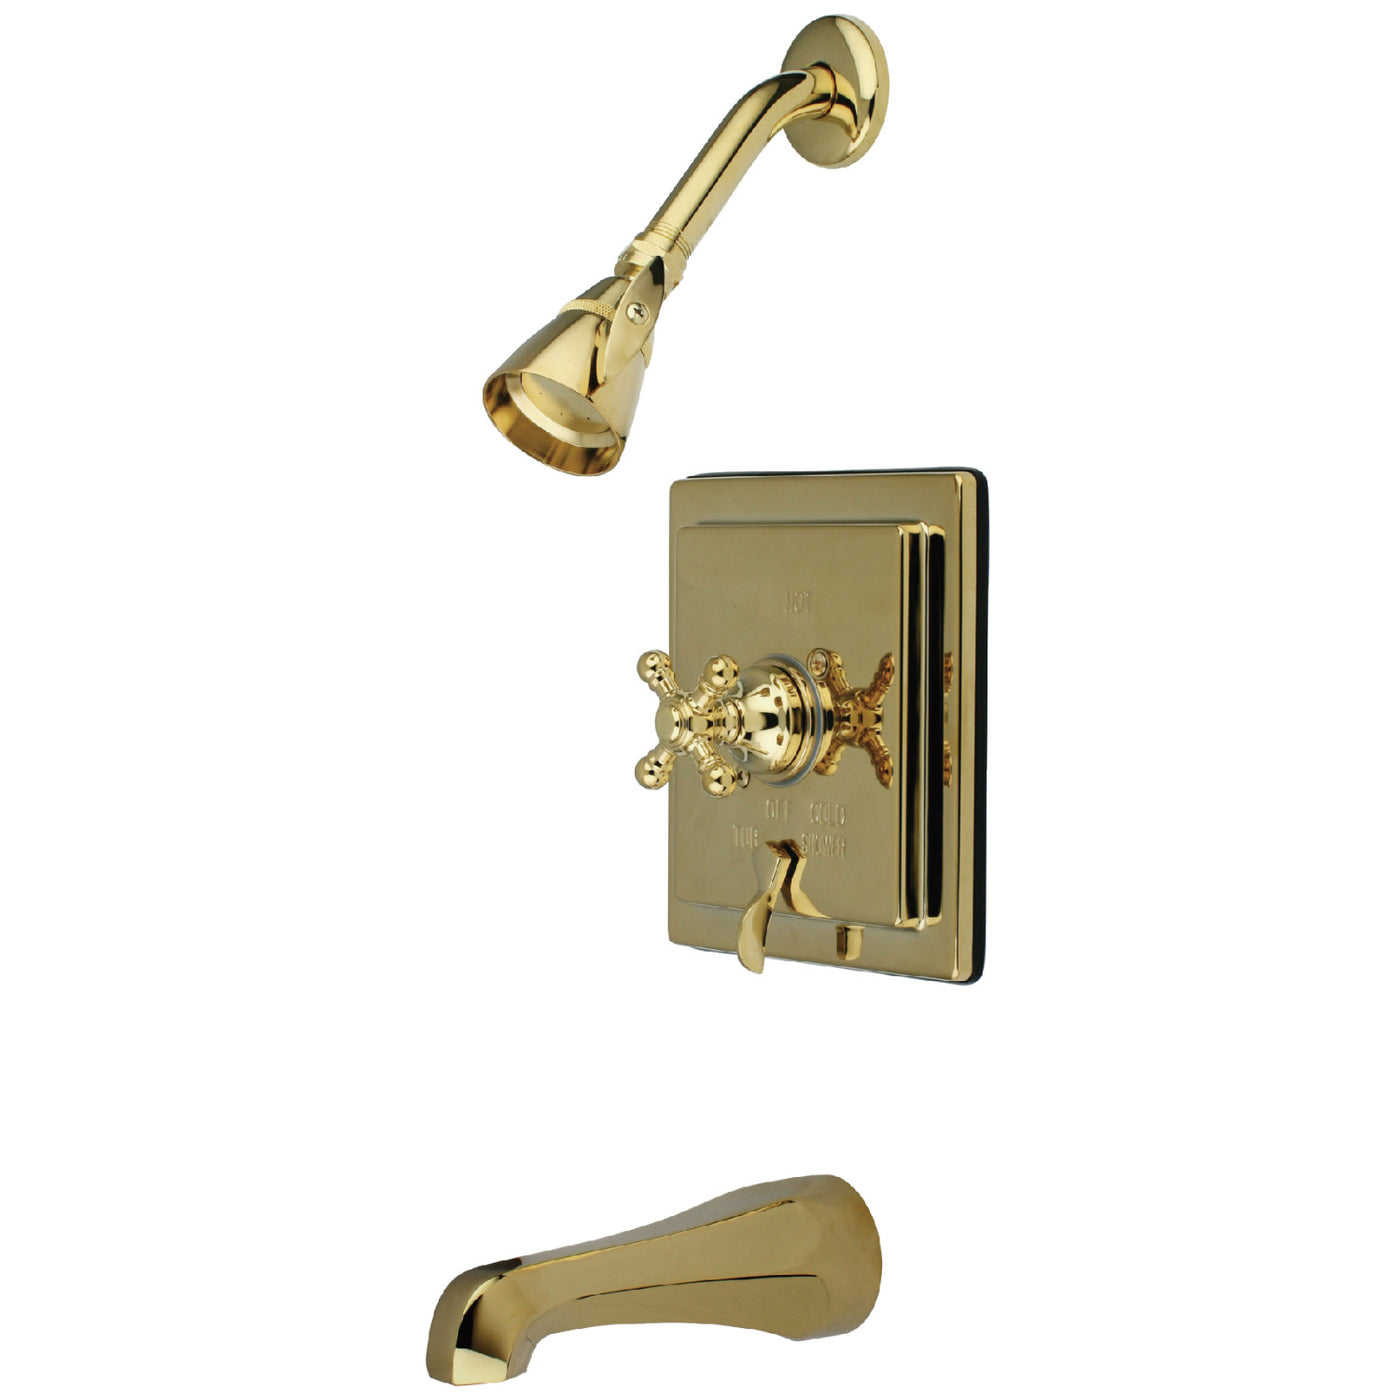 Elements of Design EB86524BX Tub and Shower Faucet with Diverter, Polished Brass